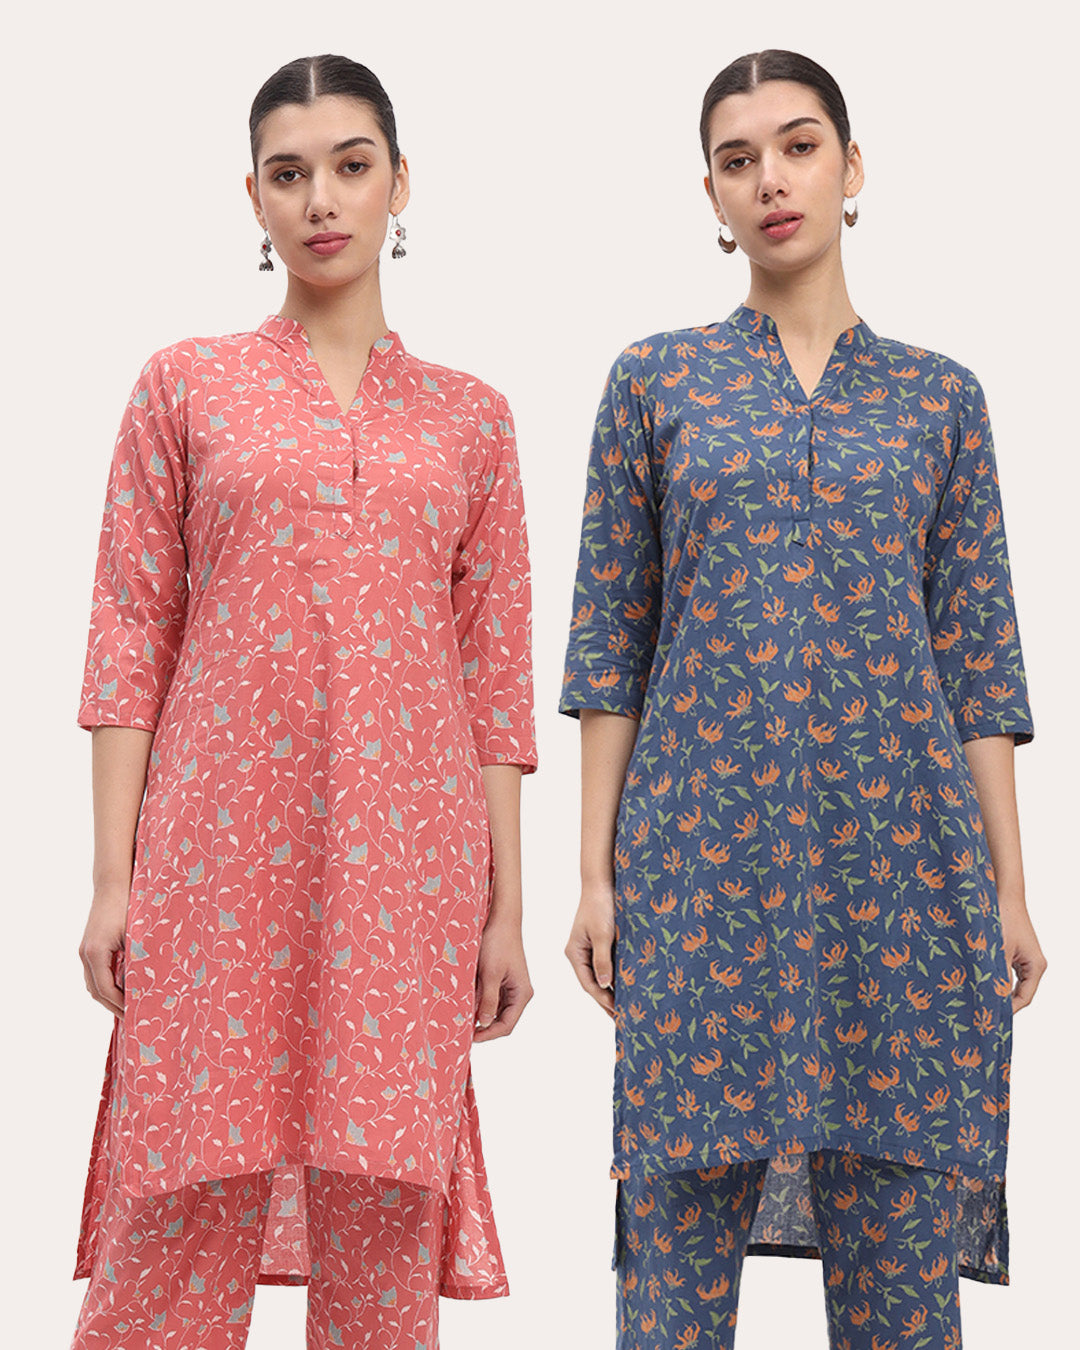 Combo: English Floral Garden & Fire Lillies High-Low Printed Kurta (Without Bottoms)